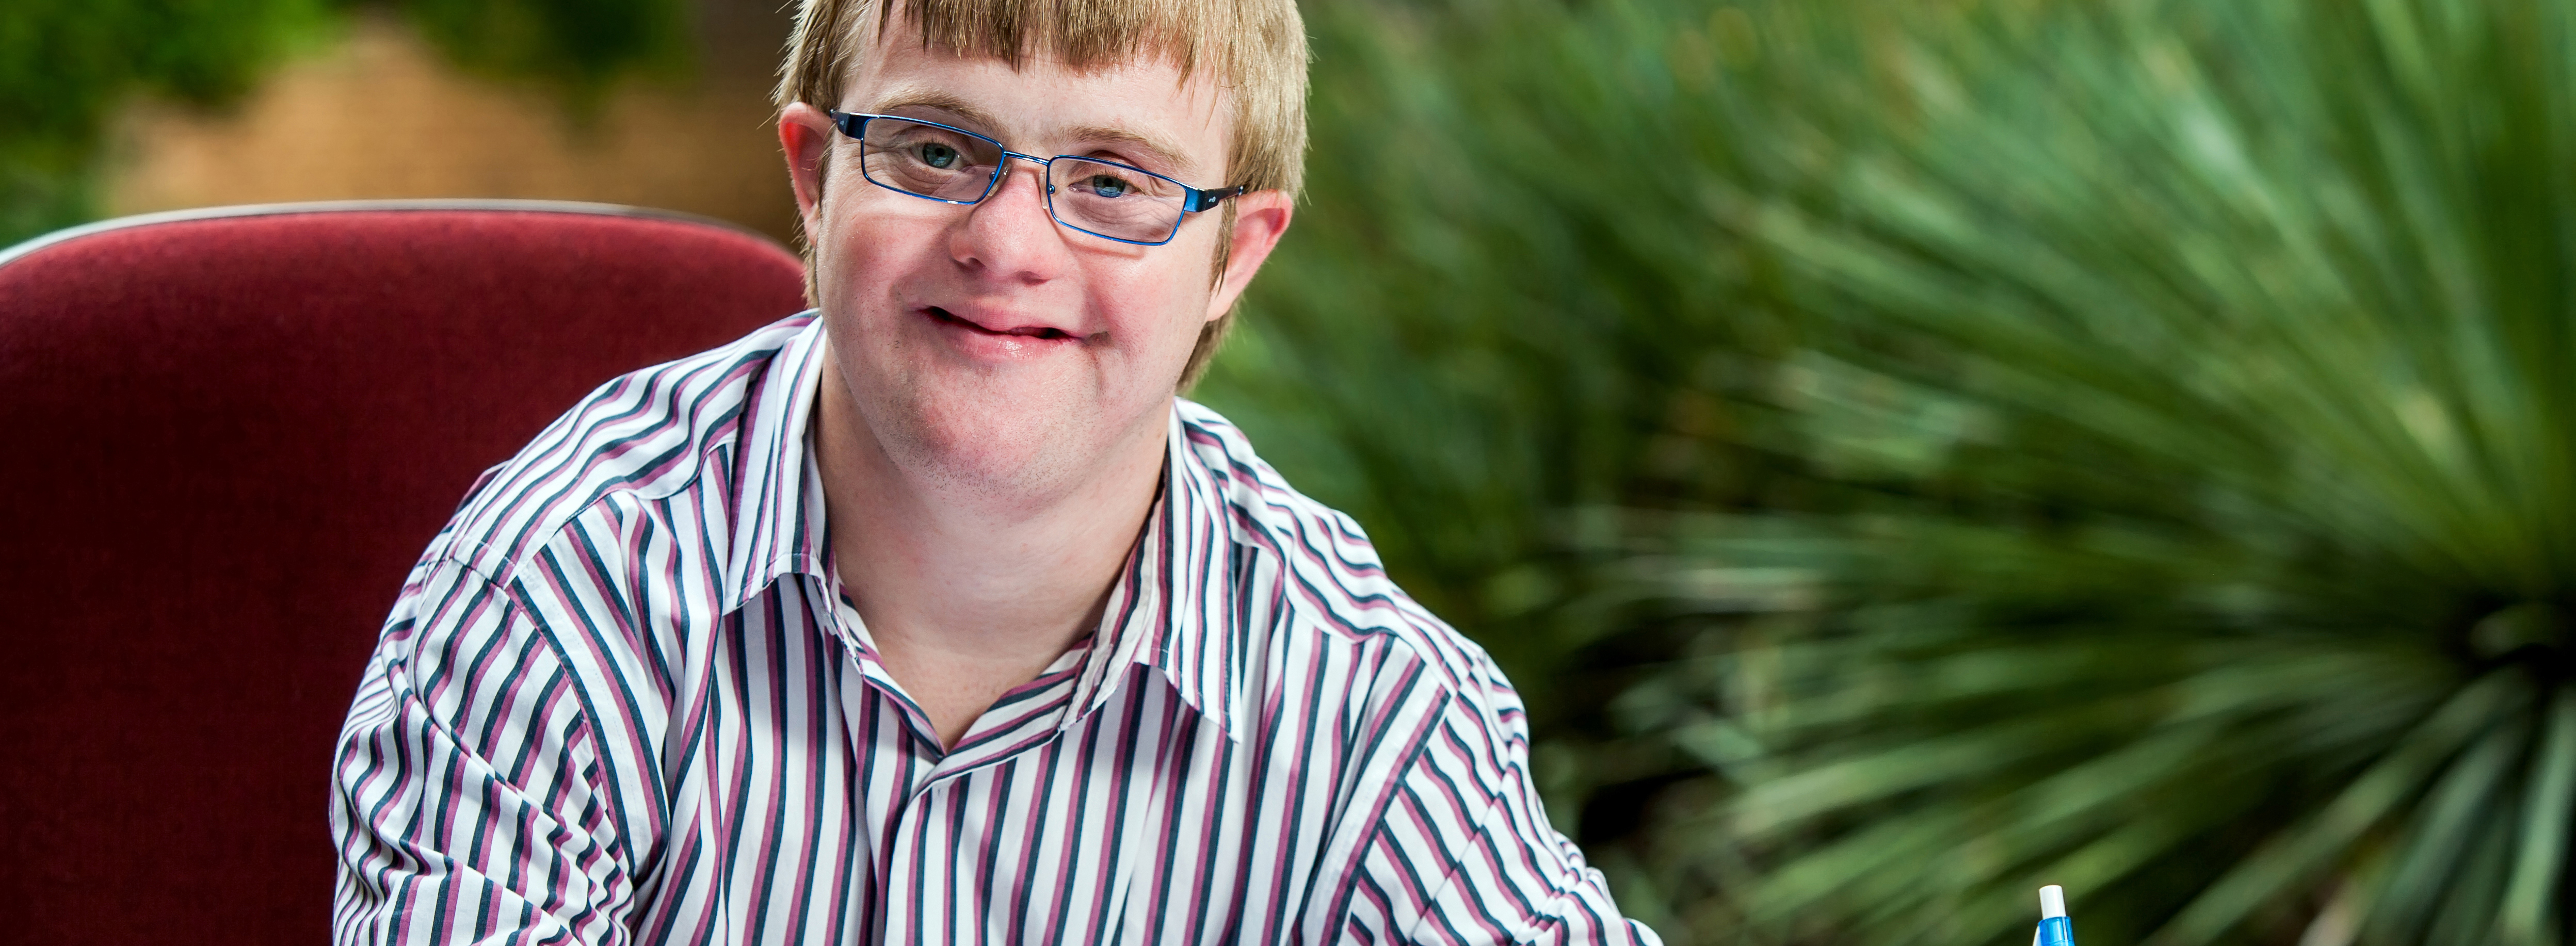 caucasian male with an intellectual disability working and smiling